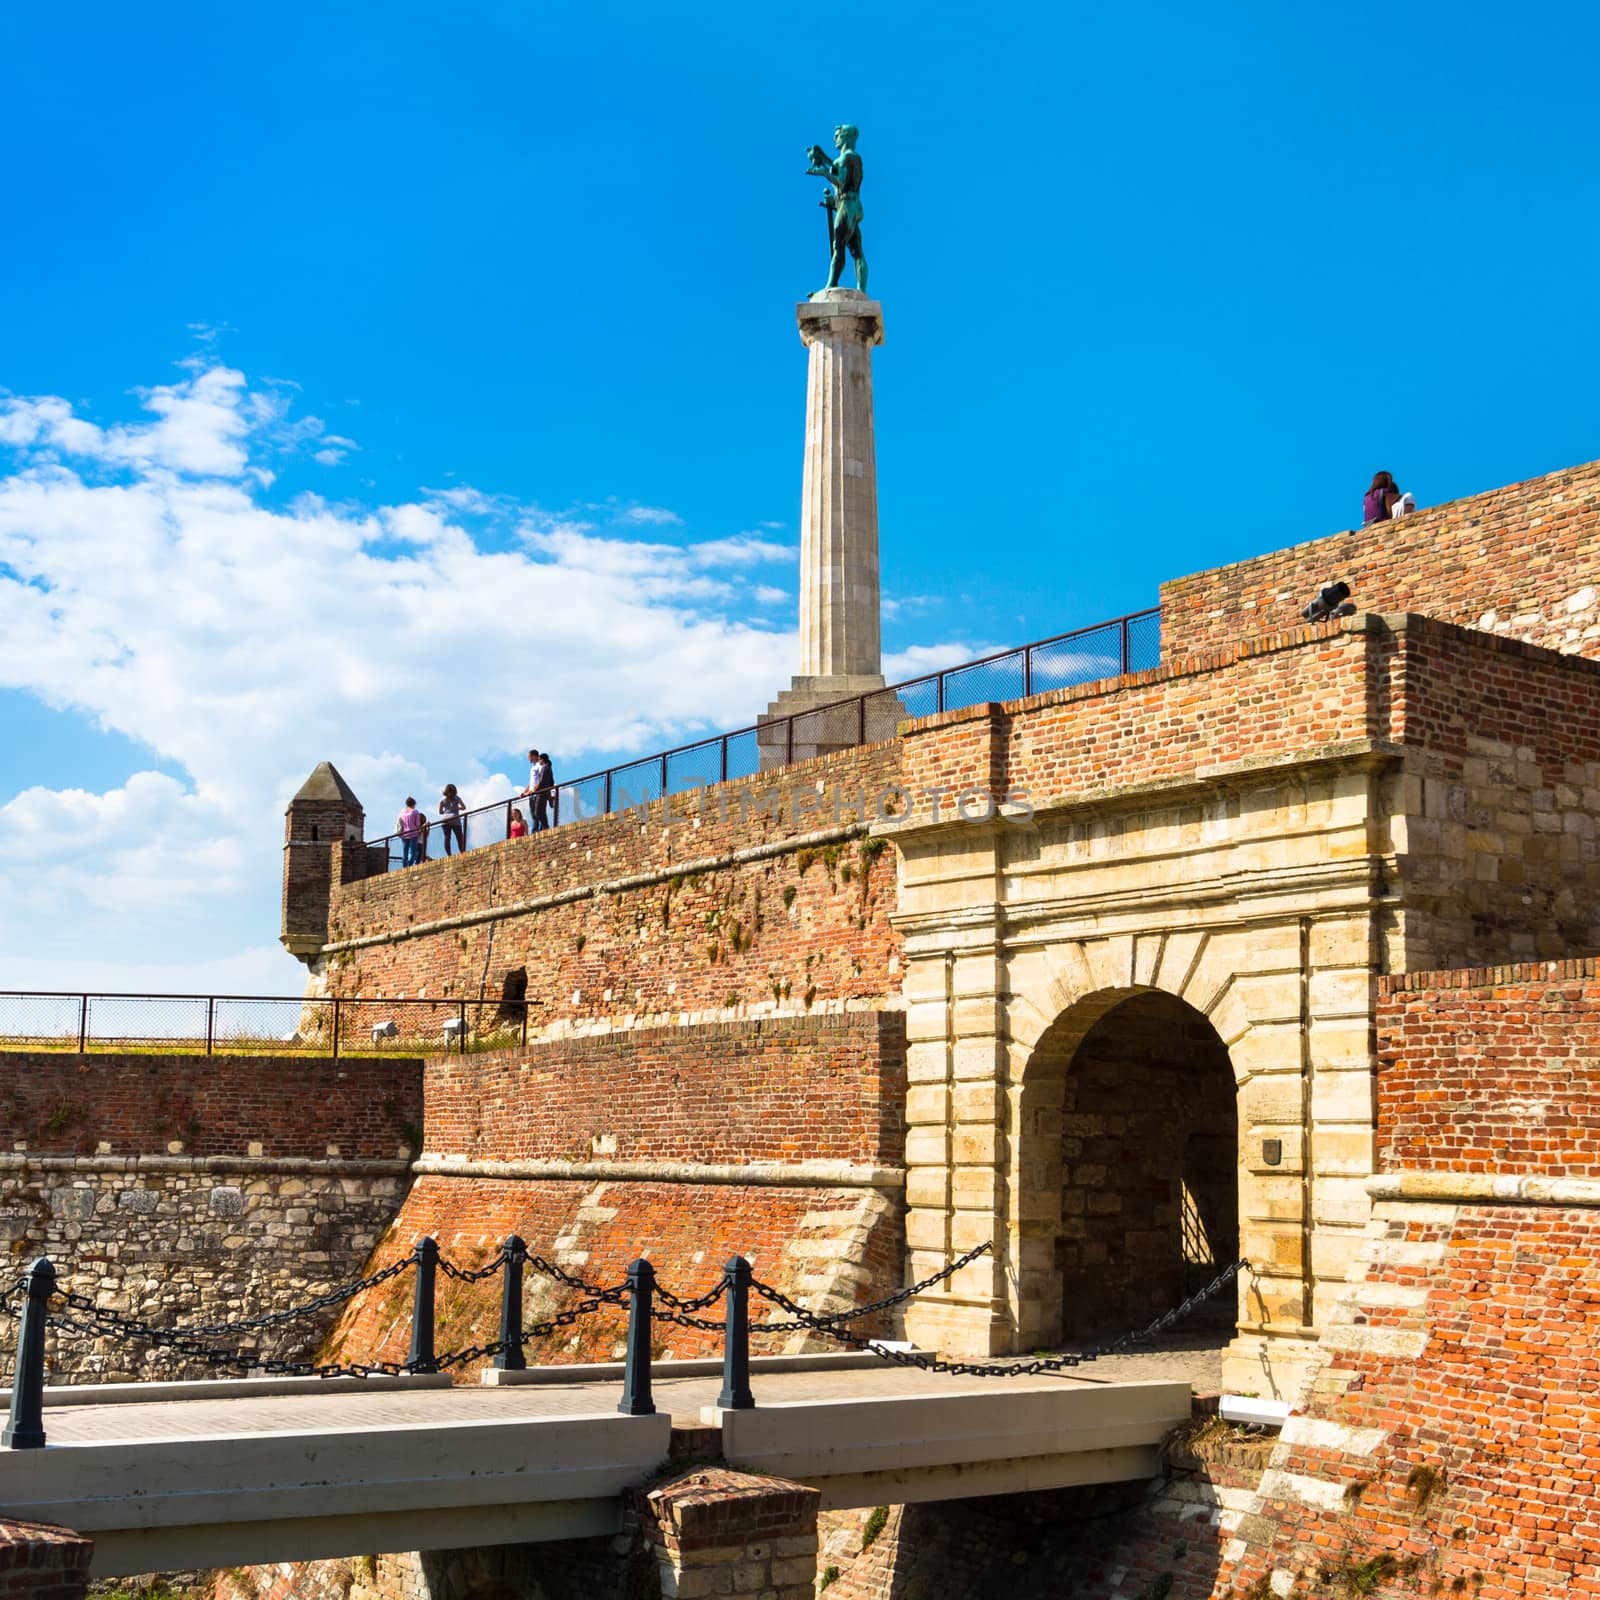 Statue of the Victor or Statue of Victory is a monument in the Kalemegdan fortress in Belgrade, erected on 1928 to commemorate the Kingdom of Serbia's war victories over the Ottoman Empire.